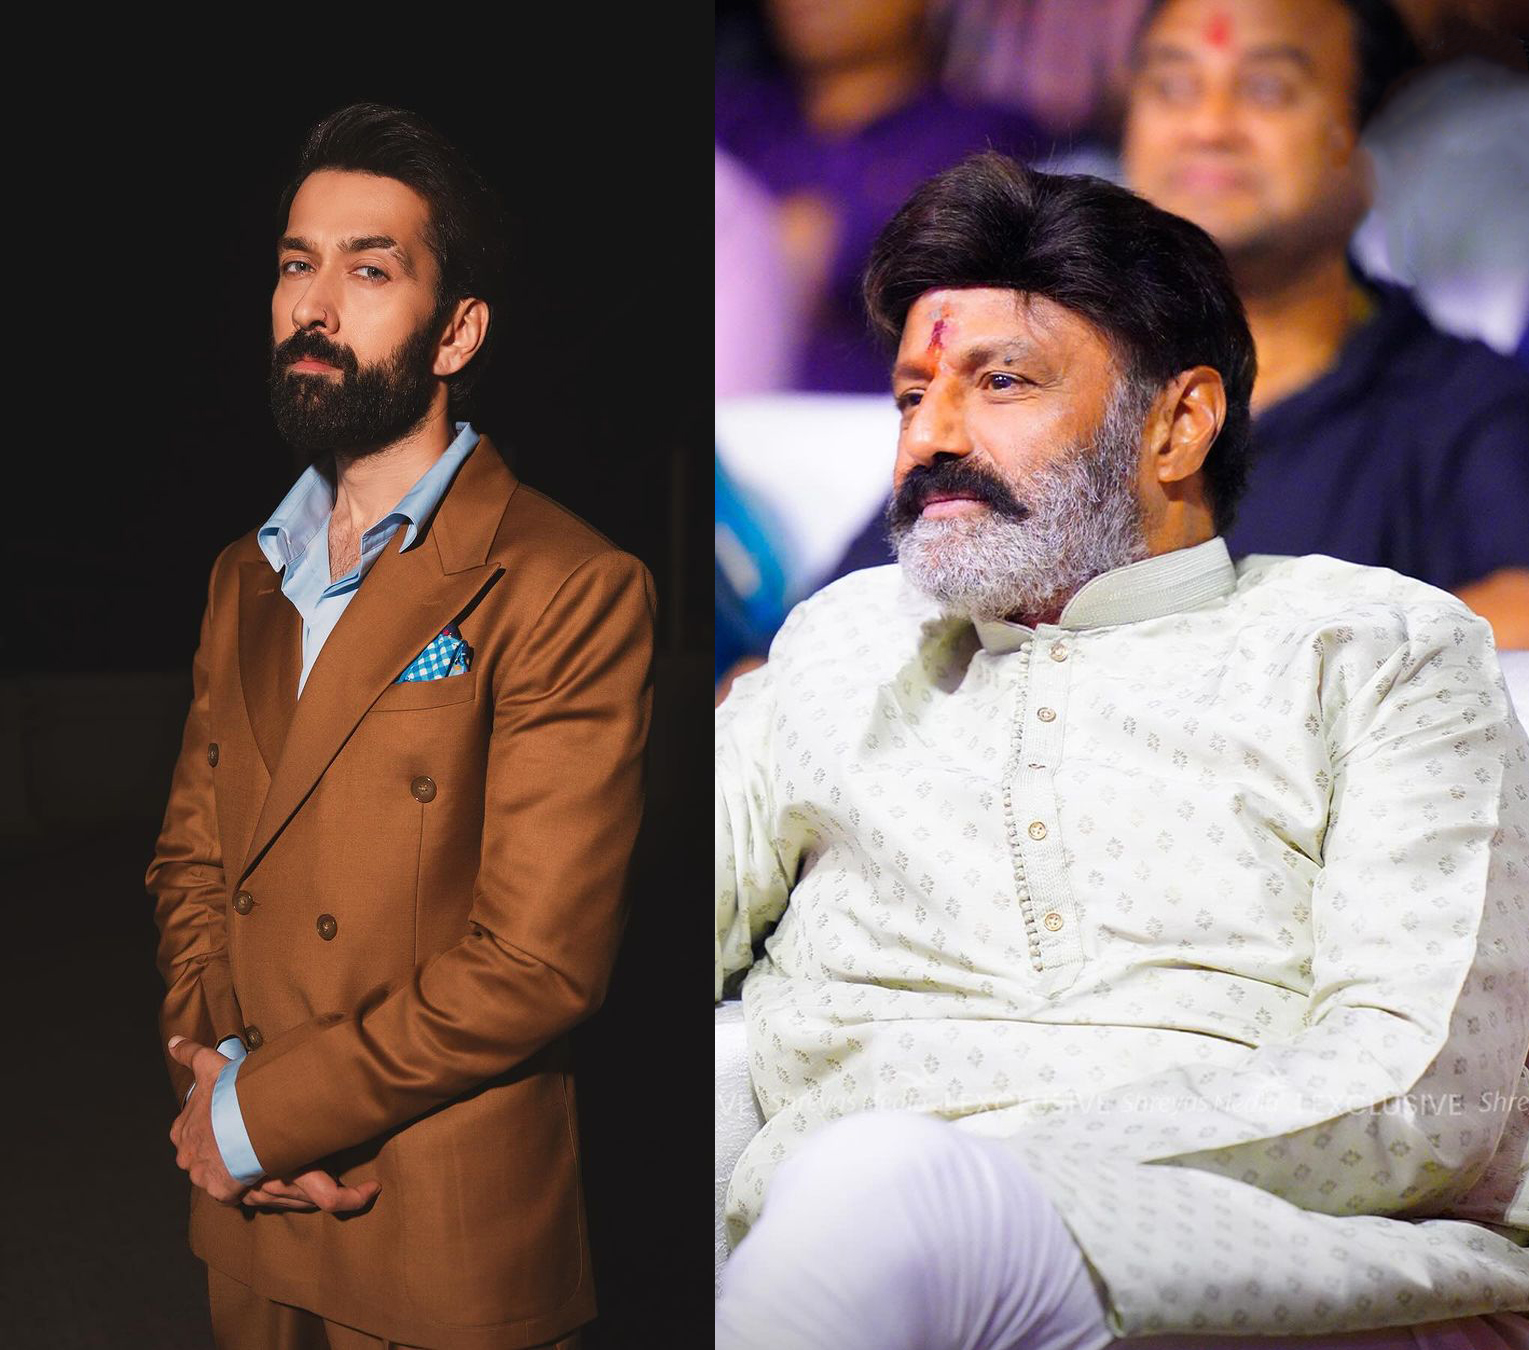 Our Favorite Actor Nakuul Mehta Has Strongly Reacts To Telugu Renowned Actor Nandamuri Balakrishna’s Behavior. Read Here To Know Why!